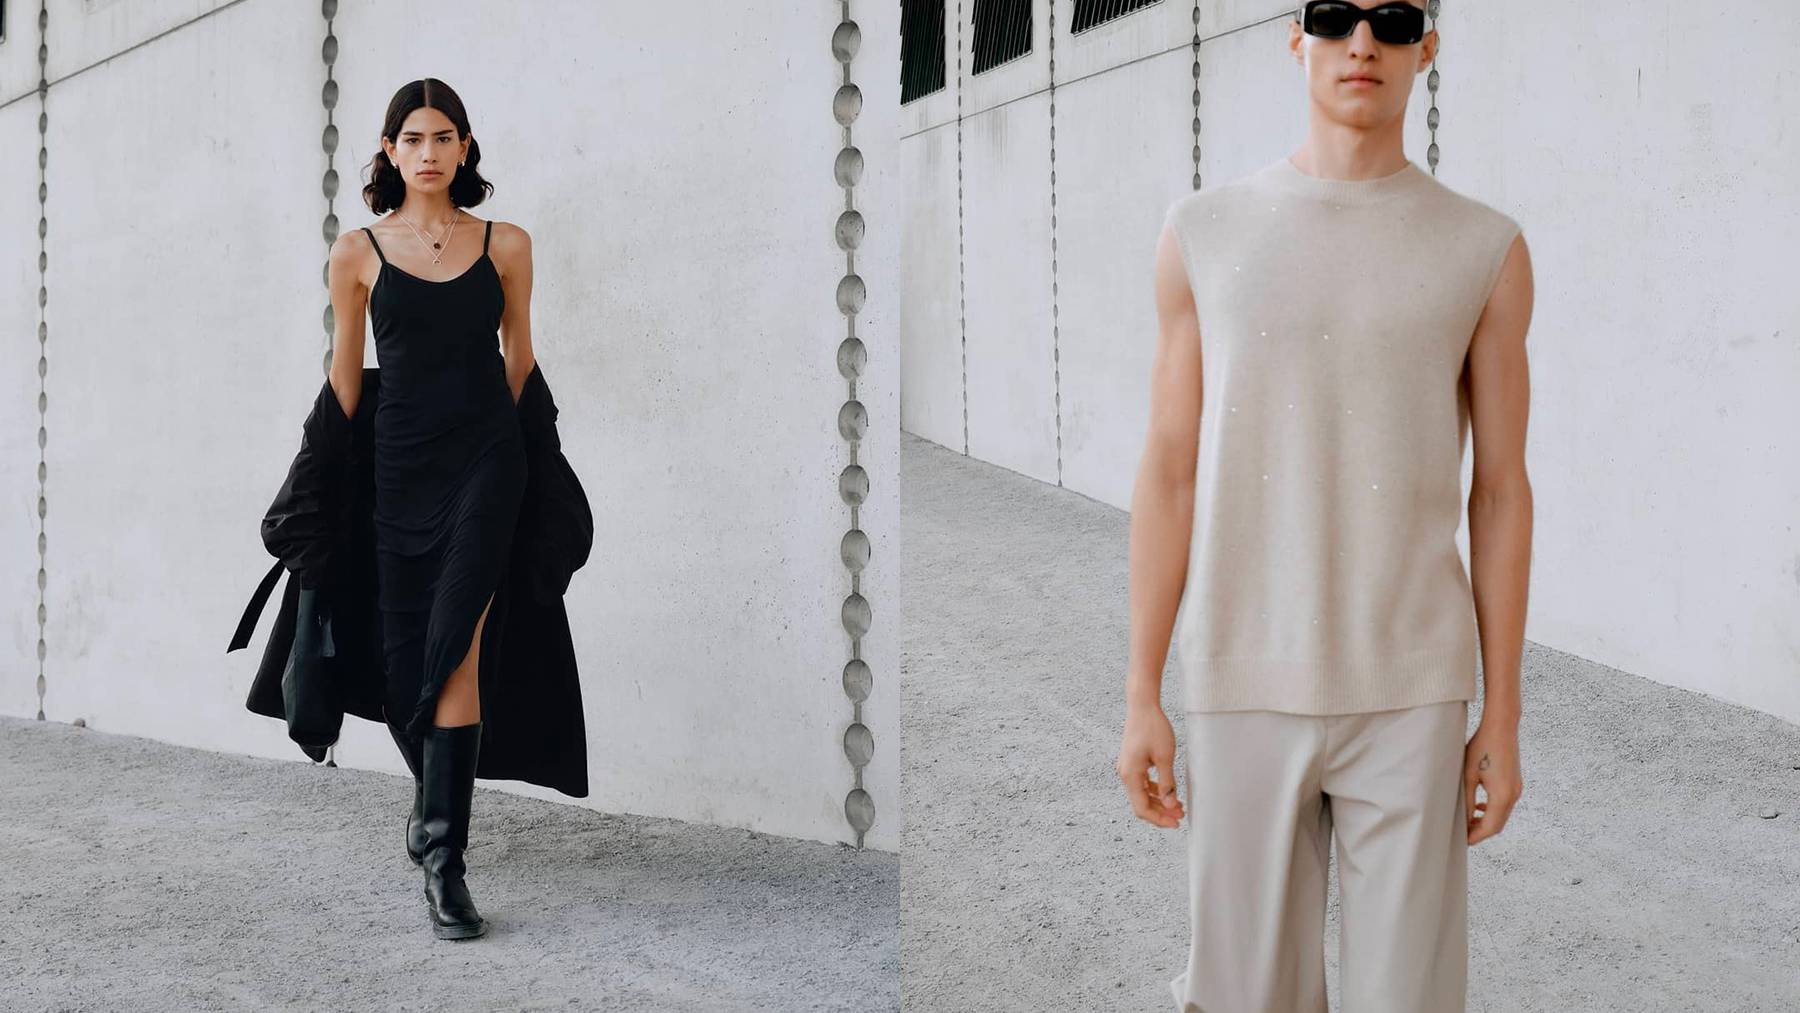 Filippa K recently teased looks from its SS22 collection on Instagram.